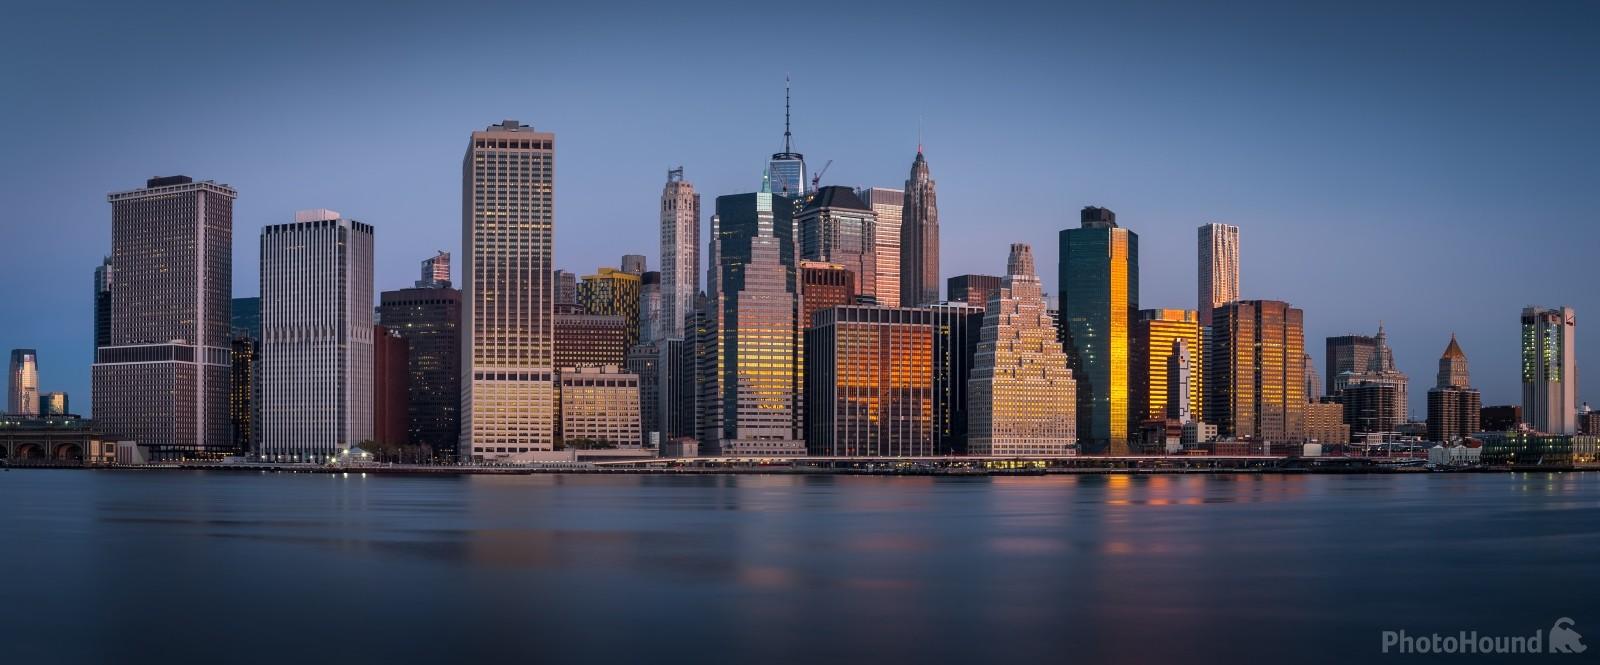 Image of Lower Manhattan panorama from the Pier 2 by VOJTa Herout